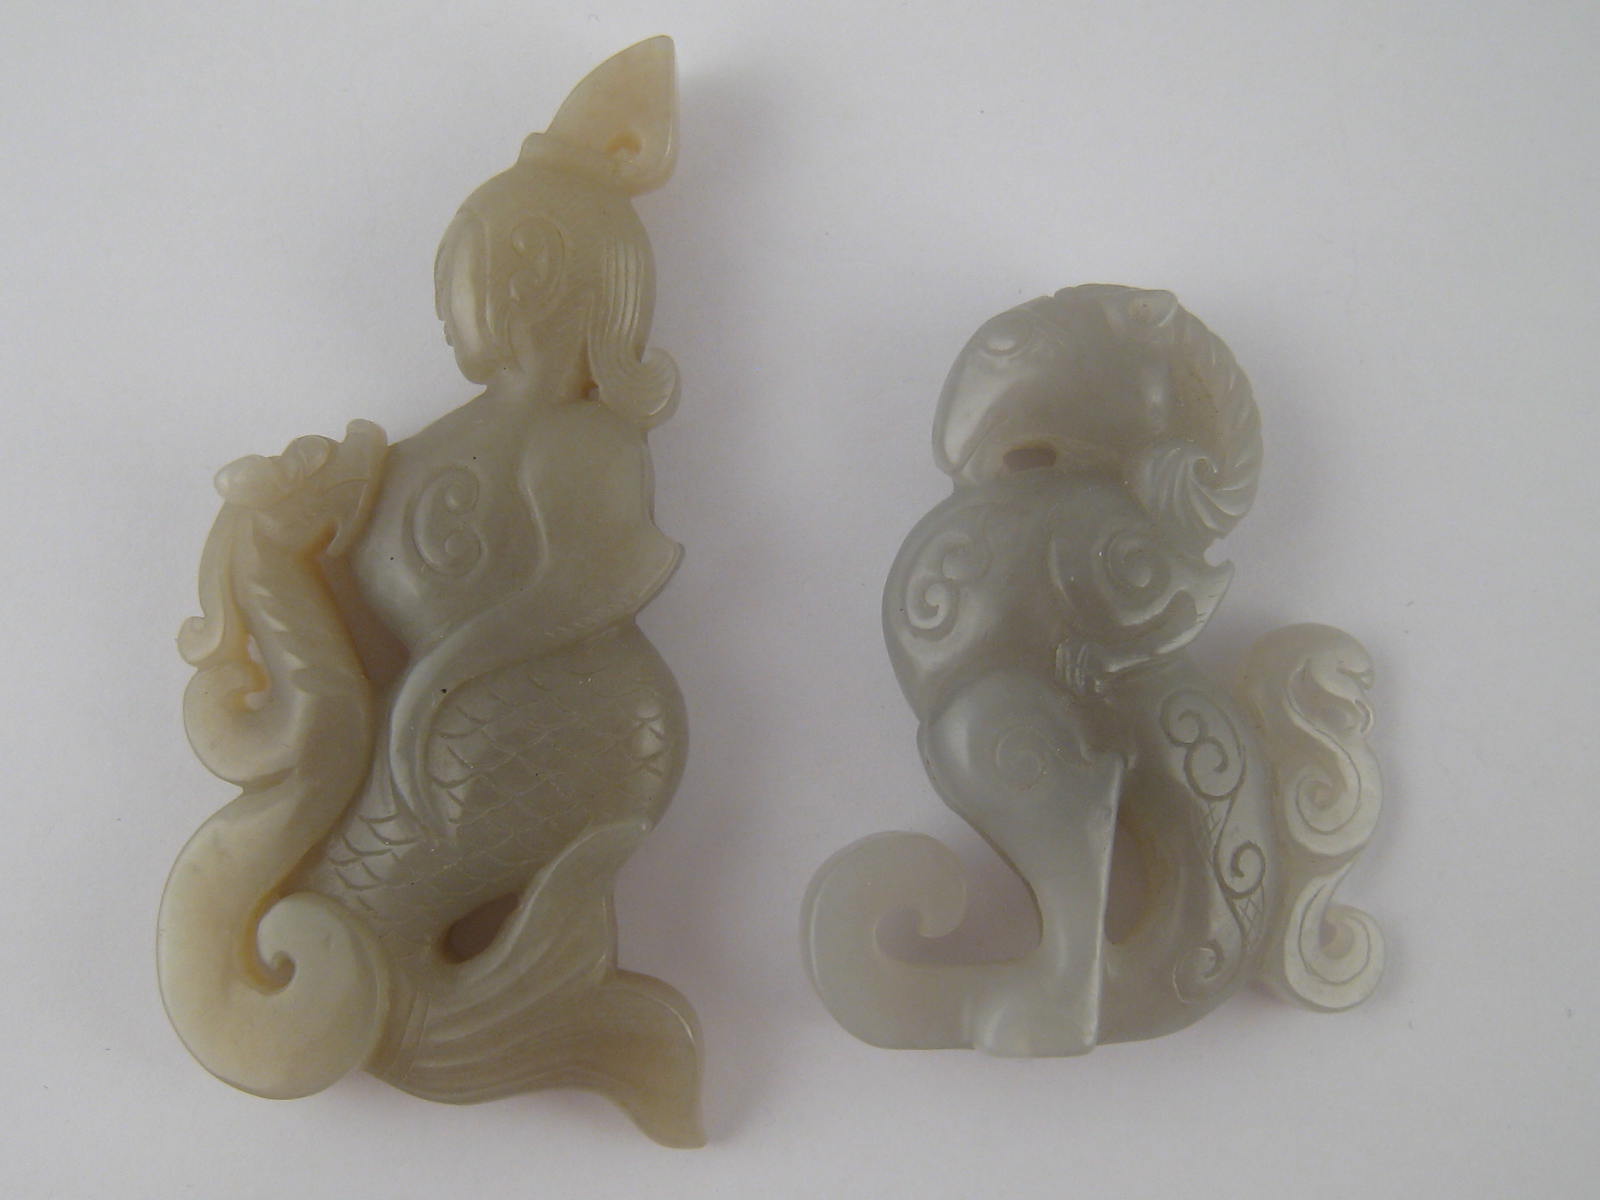 Two Chinese jade carvings, one a mermaid, the other a mythical beast, hts 9 and 8cm.